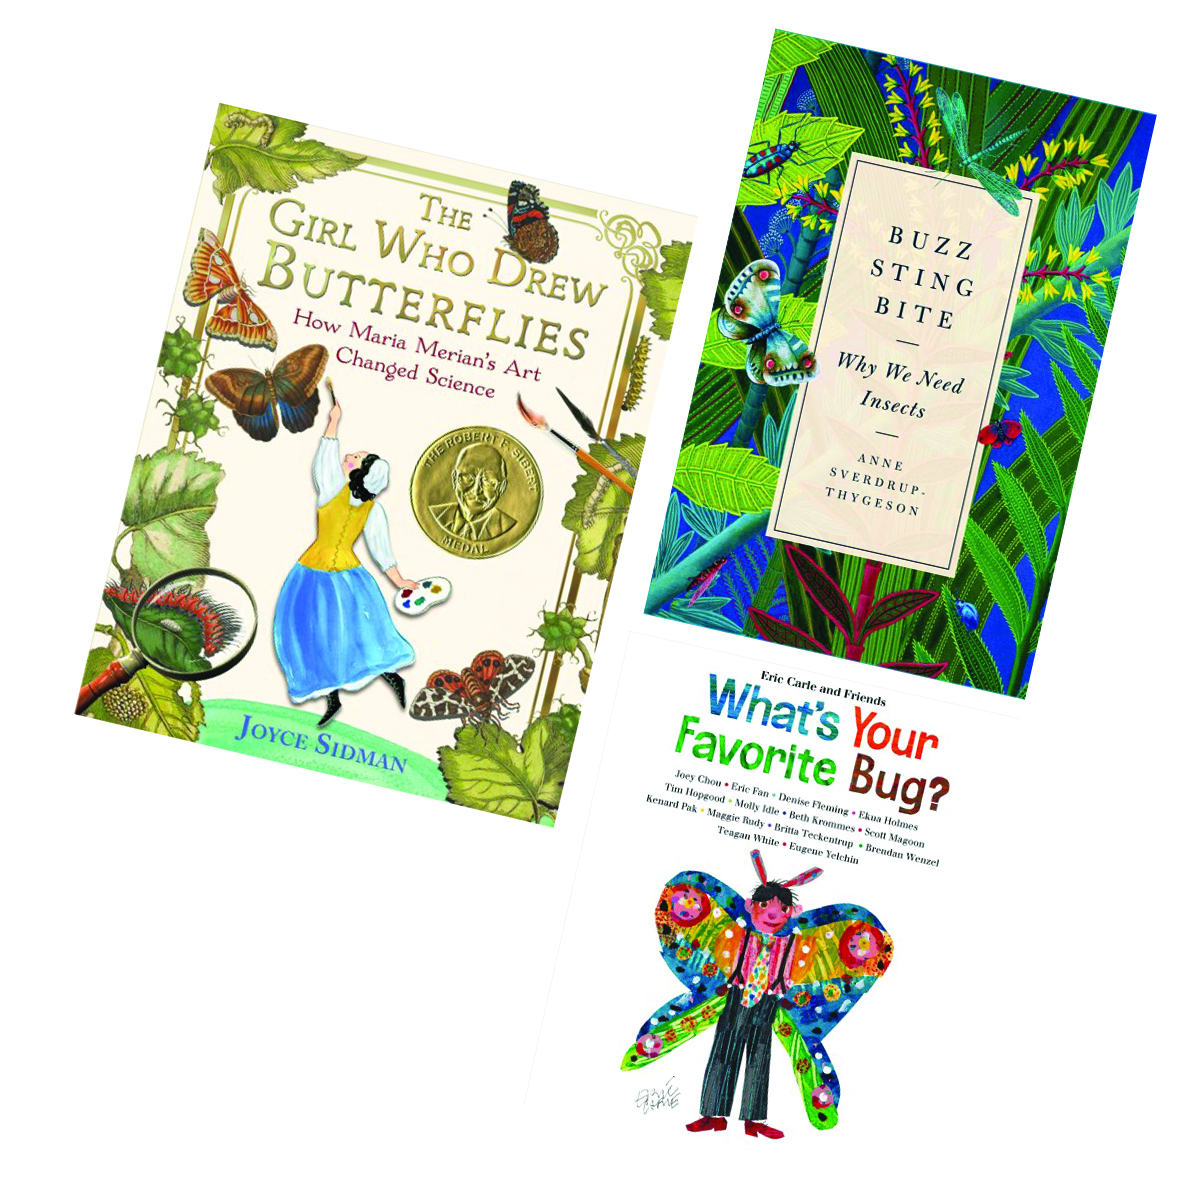 The Girl Who Drew Butterflies: How Maria Merian's Art Changed Science by  Joyce Sidman, Paperback